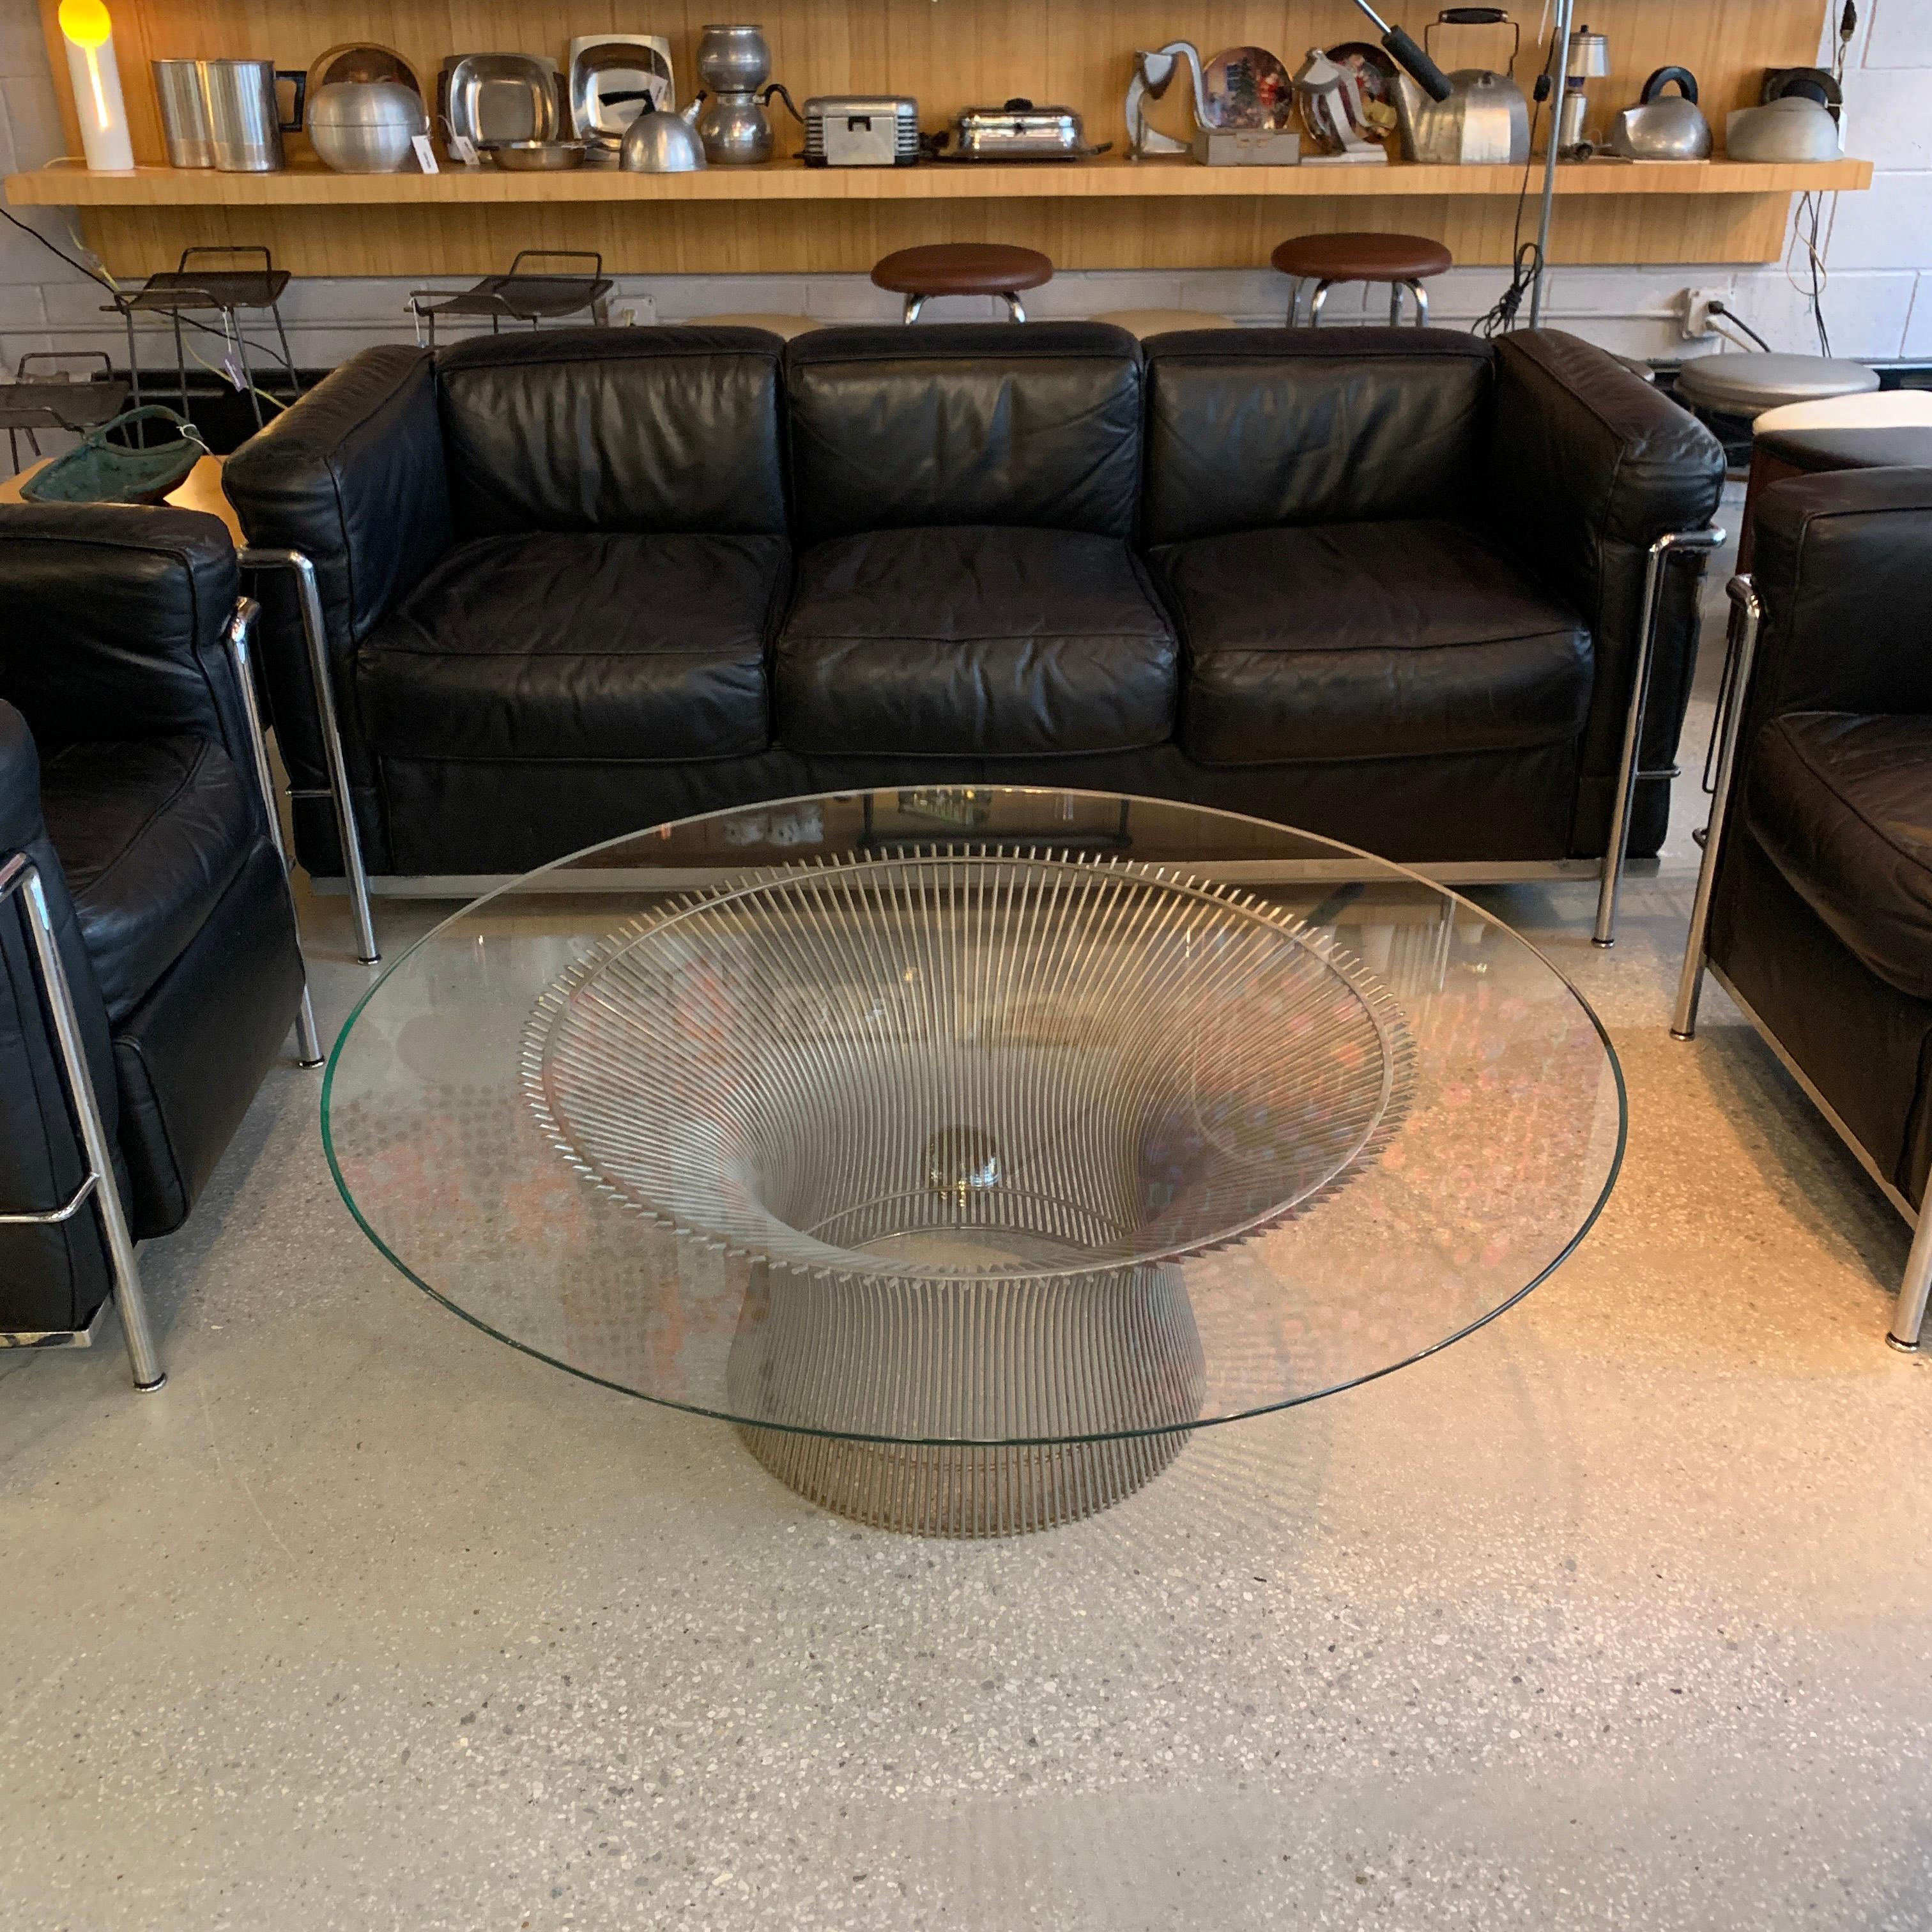 Iconic, Mid-Century Modern, coffee table by Warren Platner for Knoll features a nickel-plated, steel base with 42 inch glass top.